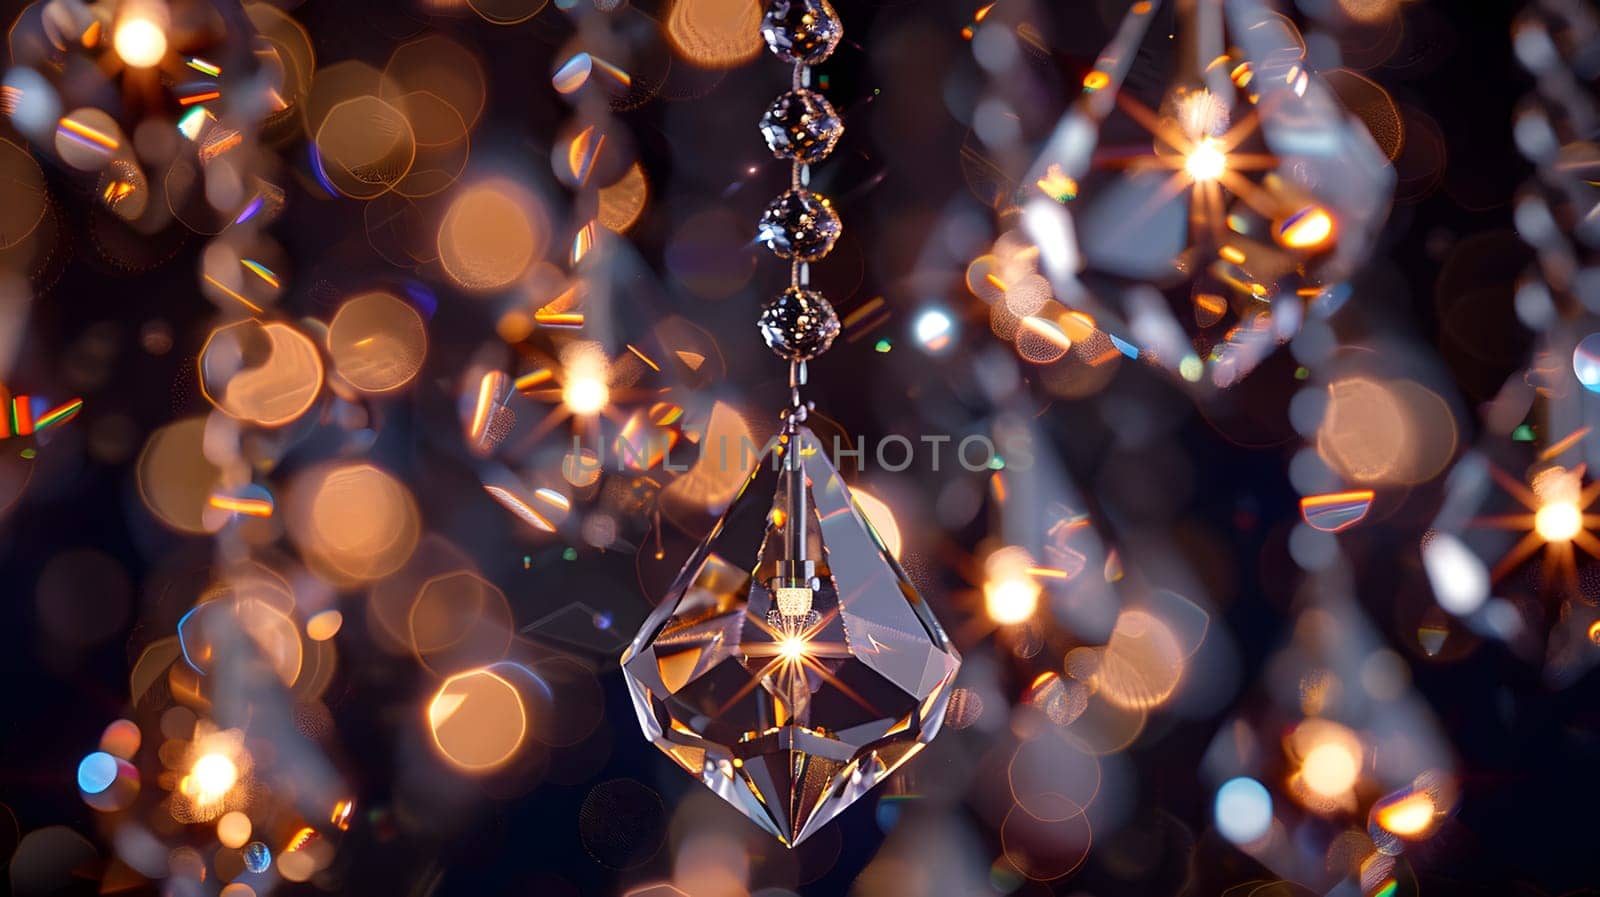 A detailed shot of a chandelier adorned with crystal ornaments, resembling a sparkling waterfall cascading from the sky